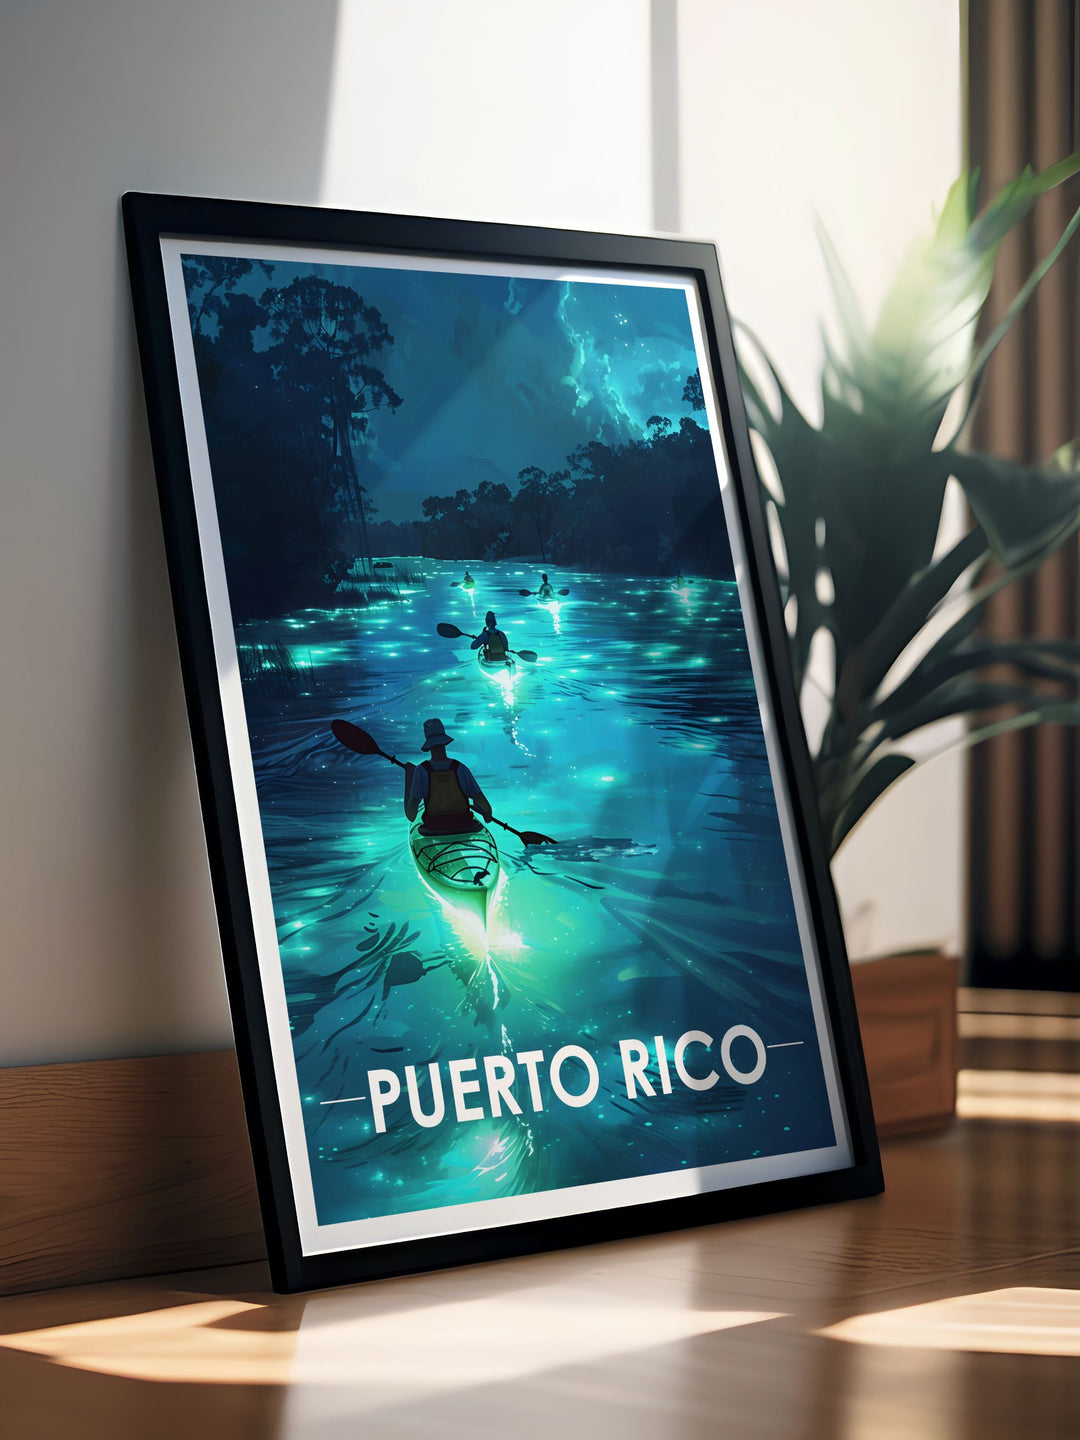 Enchanting Arecibo Wall Art featuring the famous Bioluminescent Lakes. This artwork captures the vibrant color palette and natural wonder of Arecibo, making it a must have for anyone who appreciates the beauty of Puerto Rico and unique travel experiences.